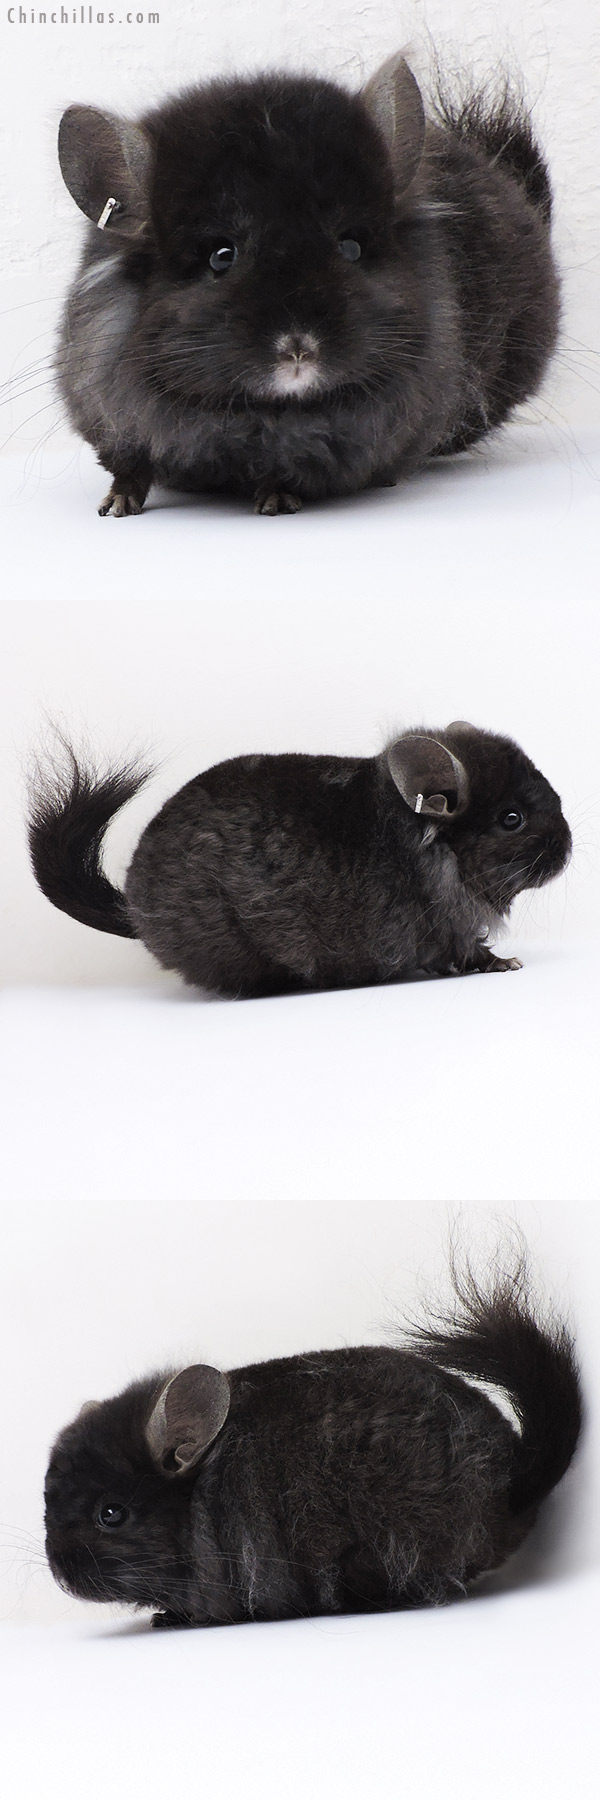 Chinchilla or related item offered for sale or export on Chinchillas.com - 18316 Ebony  Royal Imperial Angora Male Chinchilla